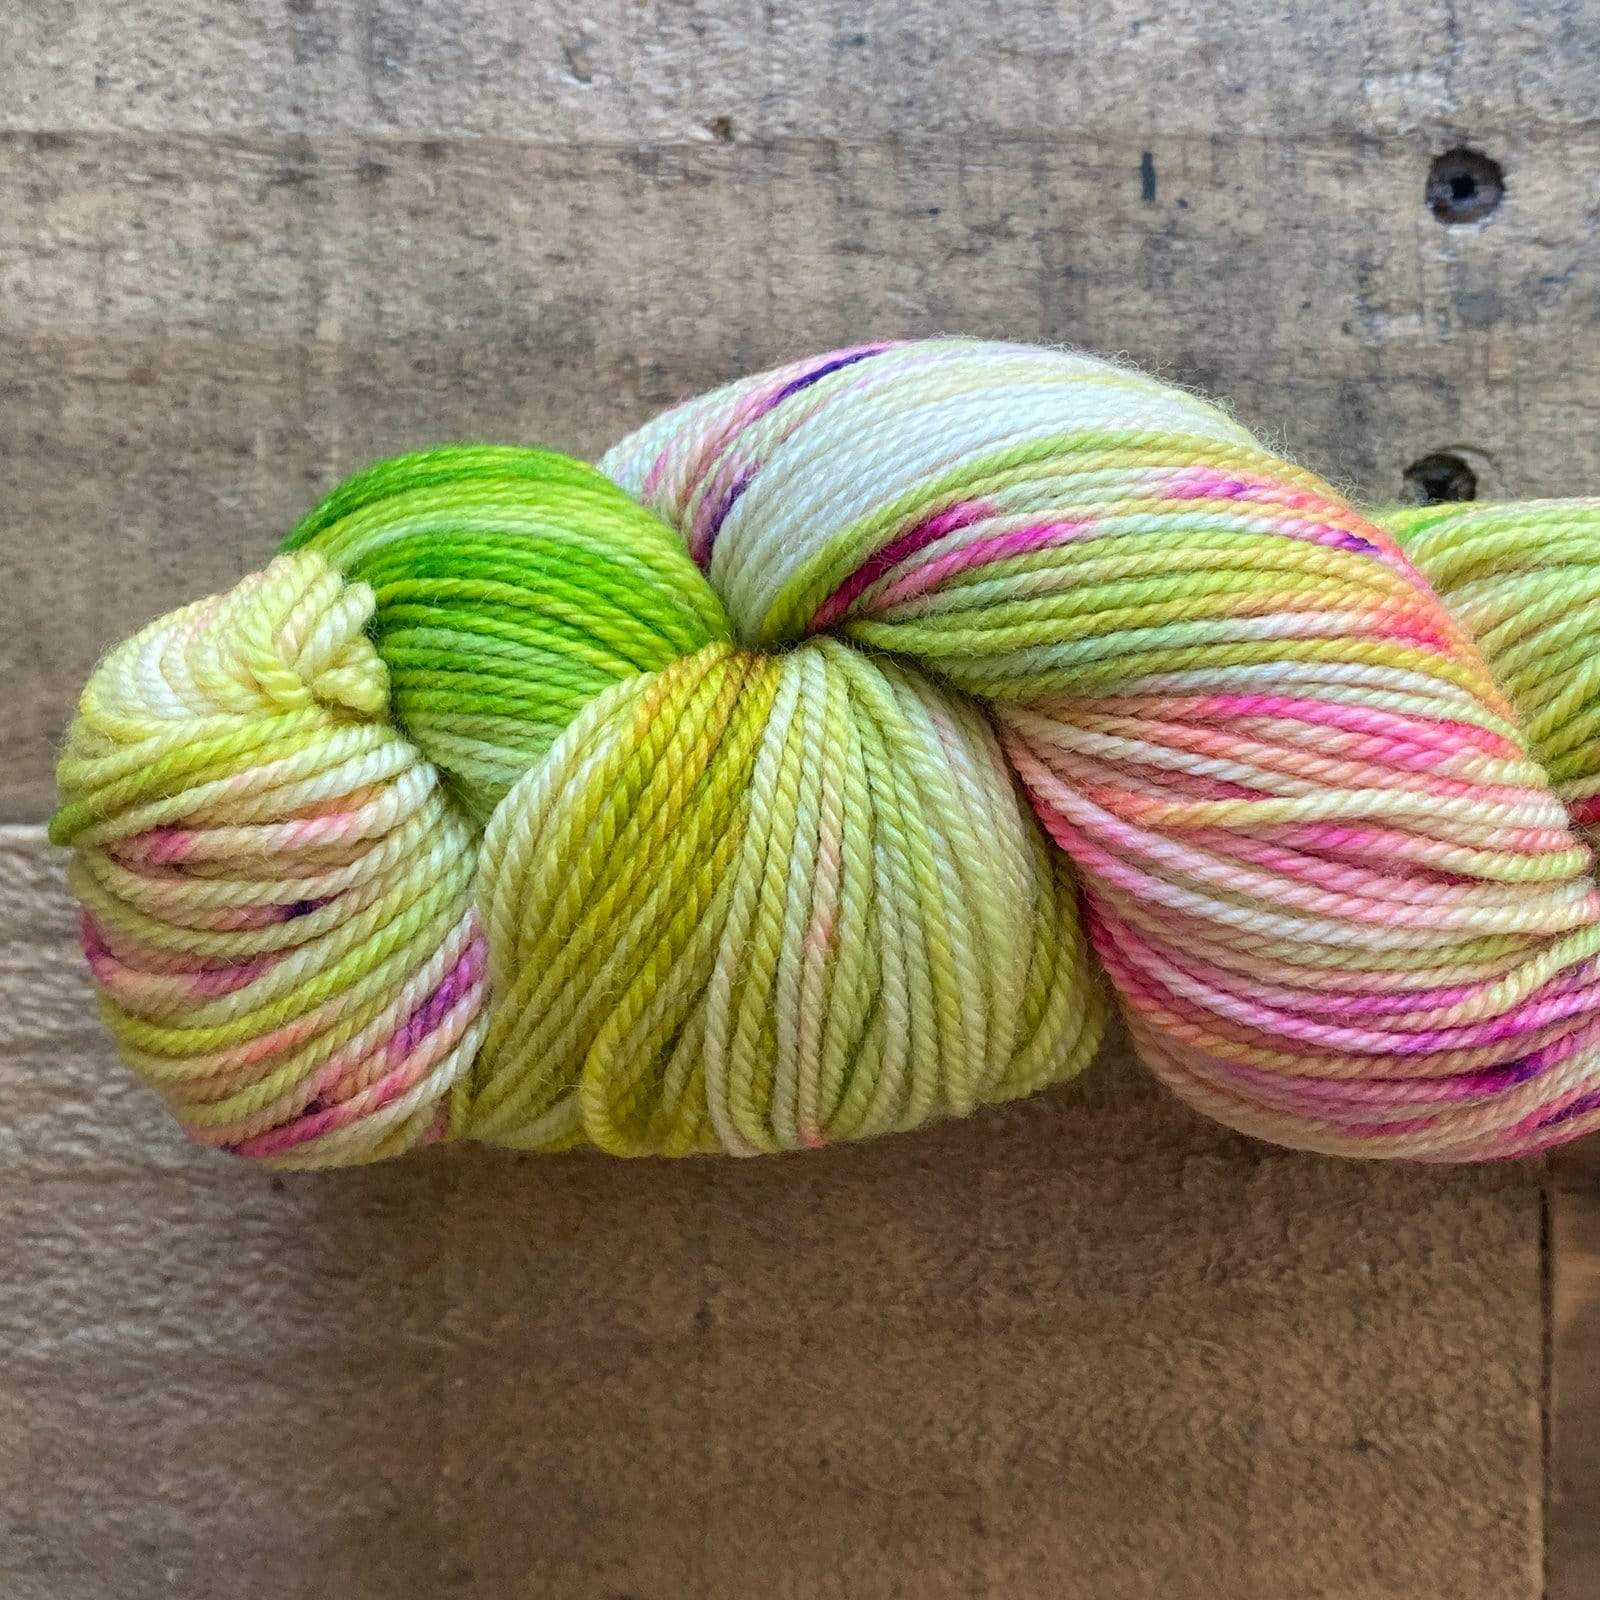 Smooshy Cashmere by Dream in Color – The Knitting Lounge